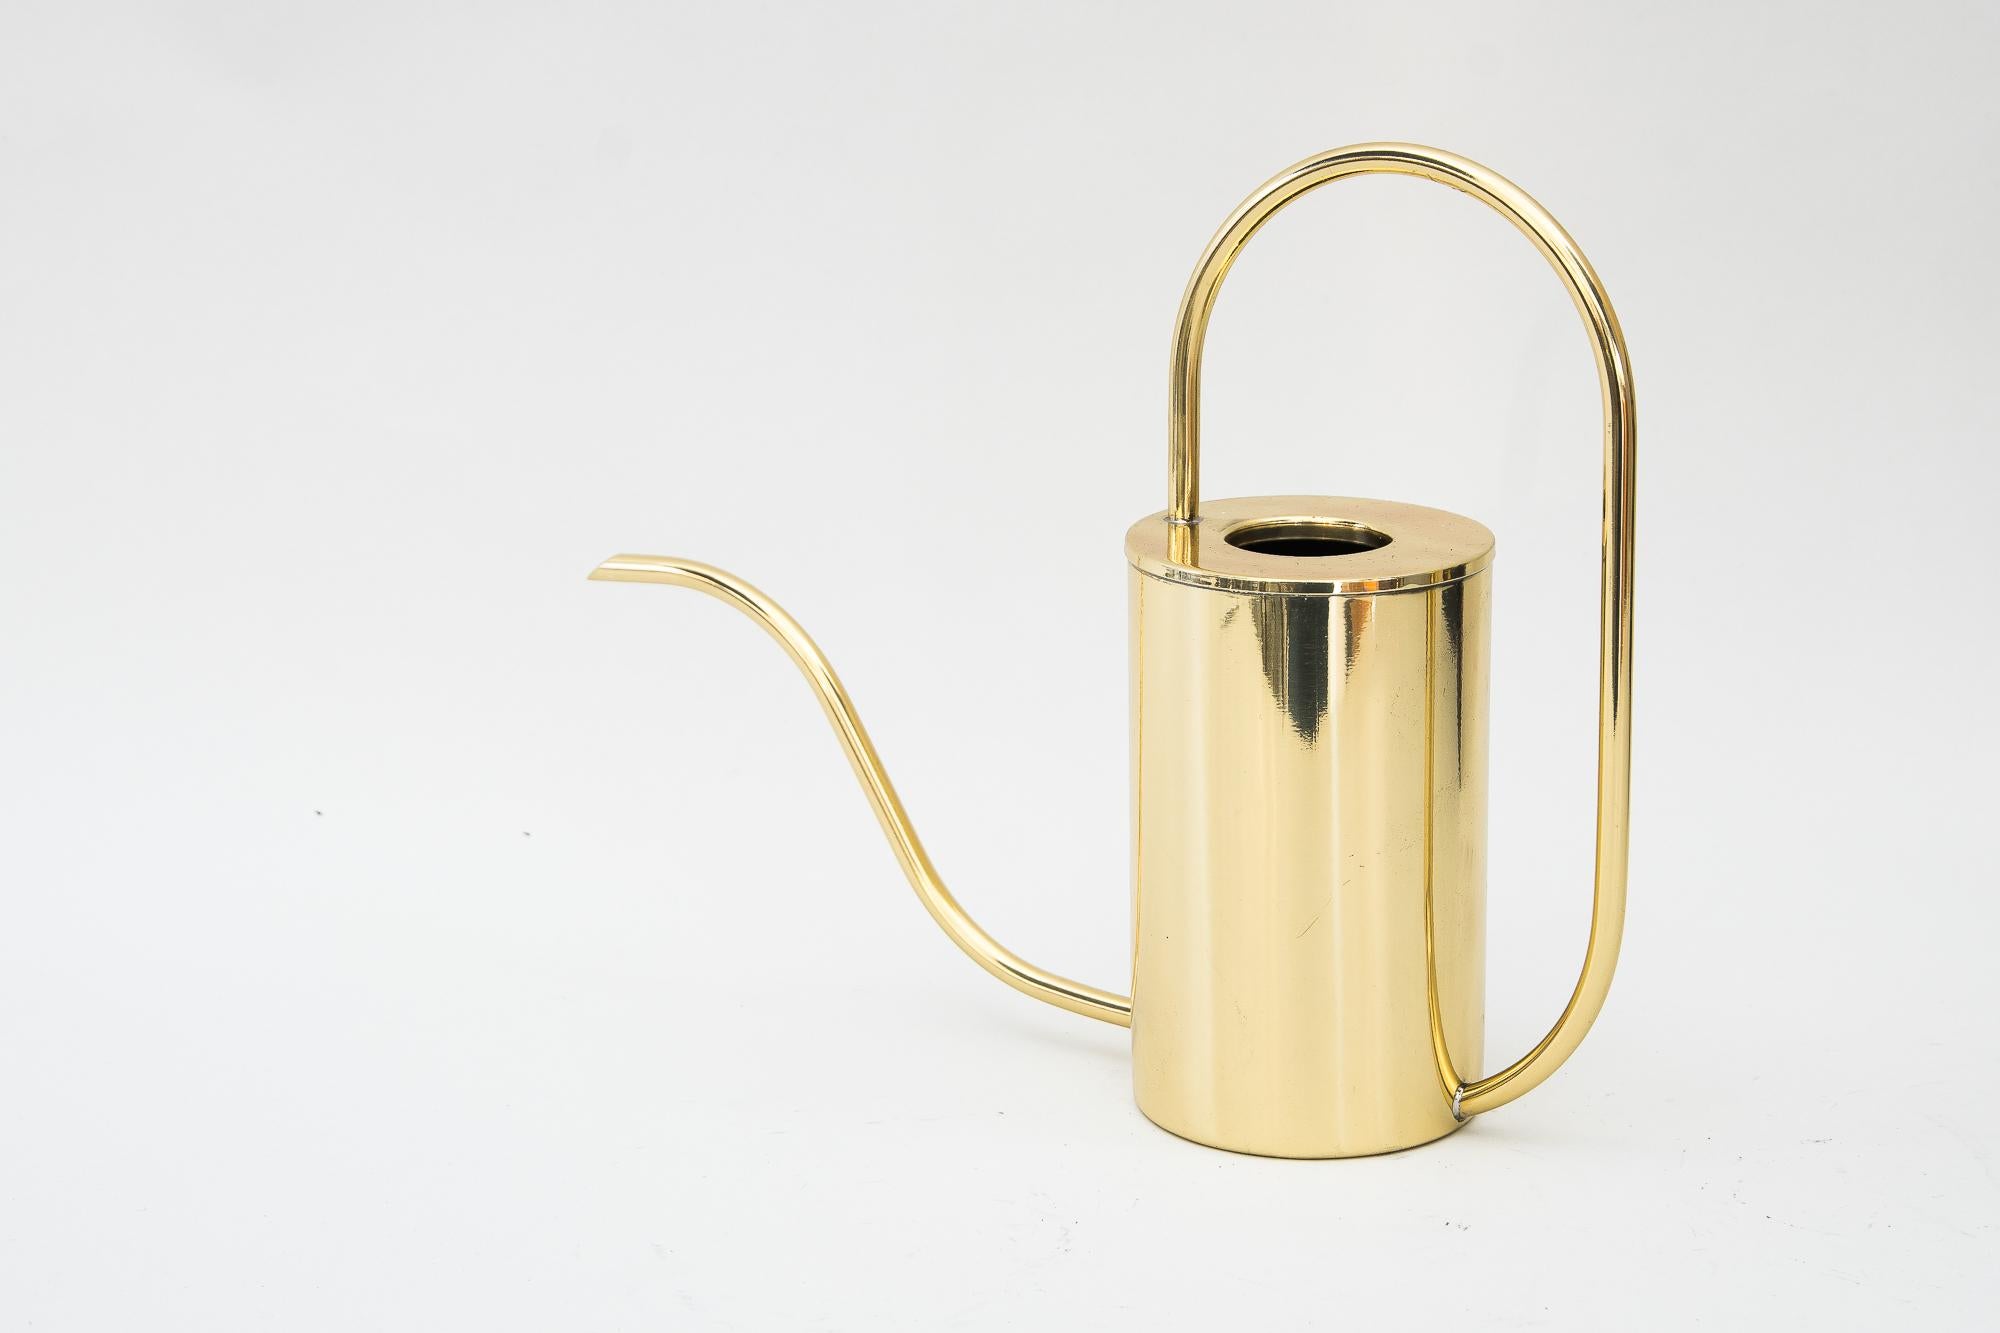 Watering can Vienna around 1950s
Polished and stove enameled brass.